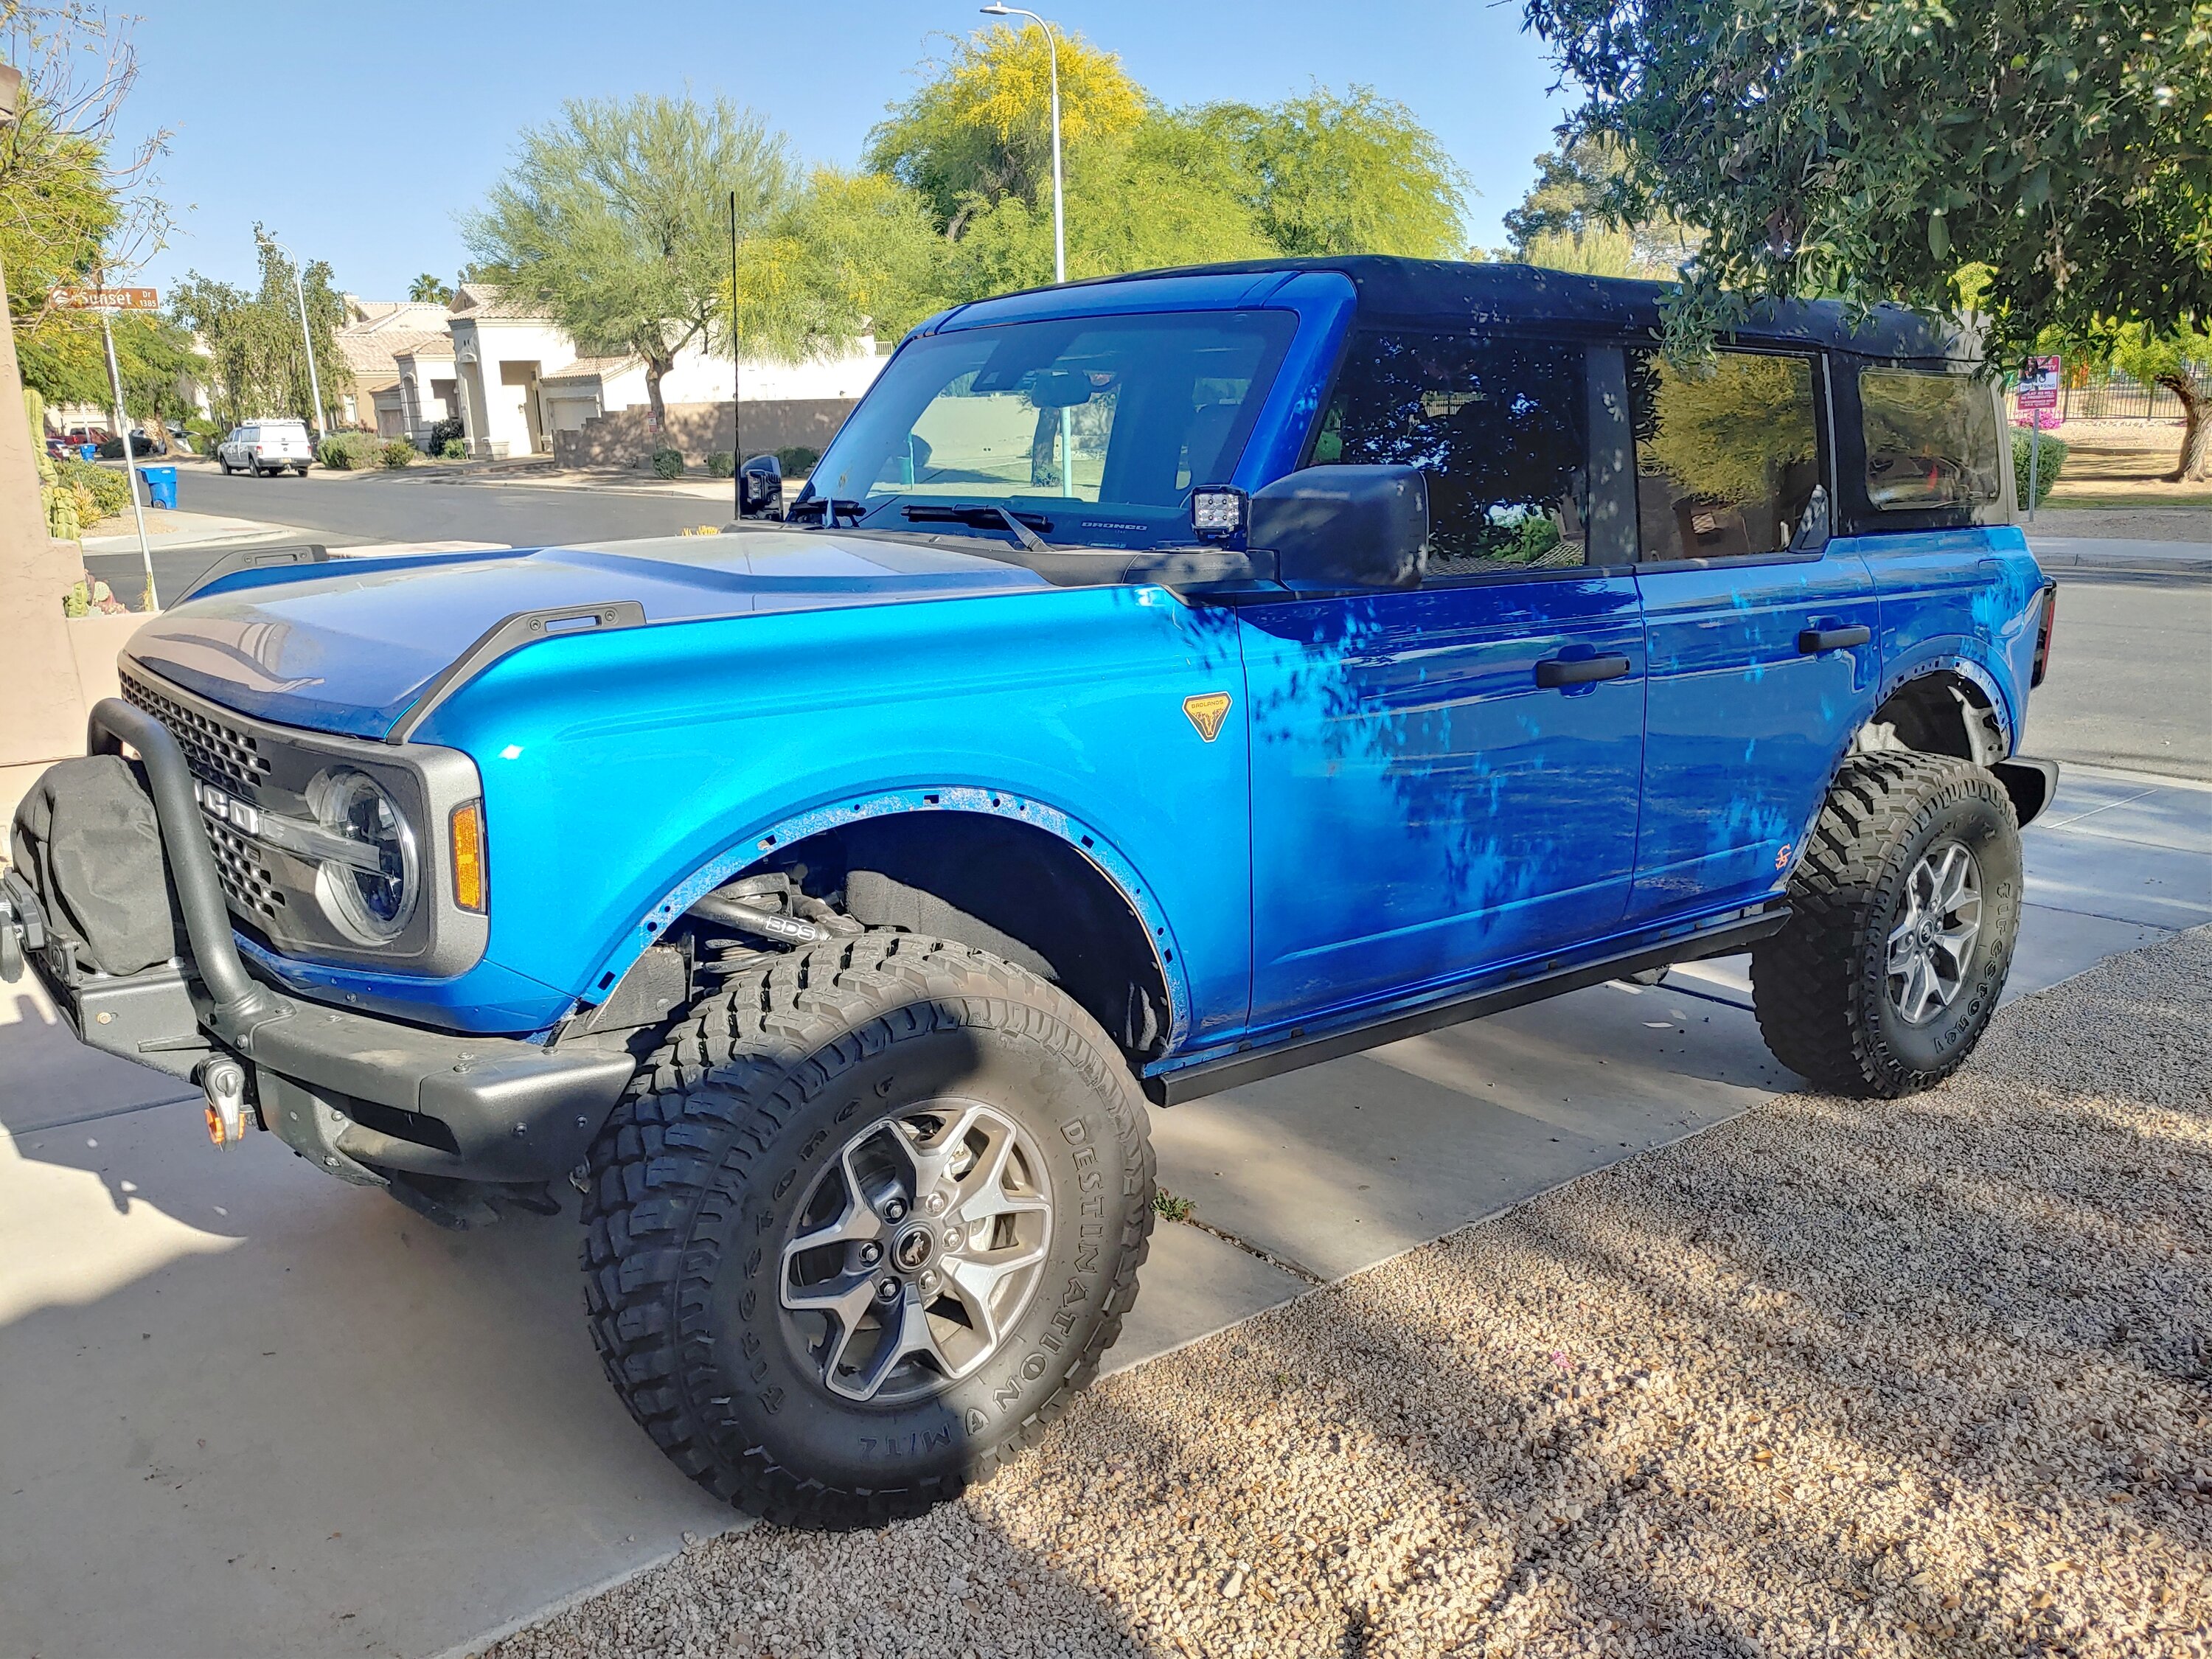 Ford Bronco Before & After Photos. Let's See Your Bronco! 20230426_170545_HDR